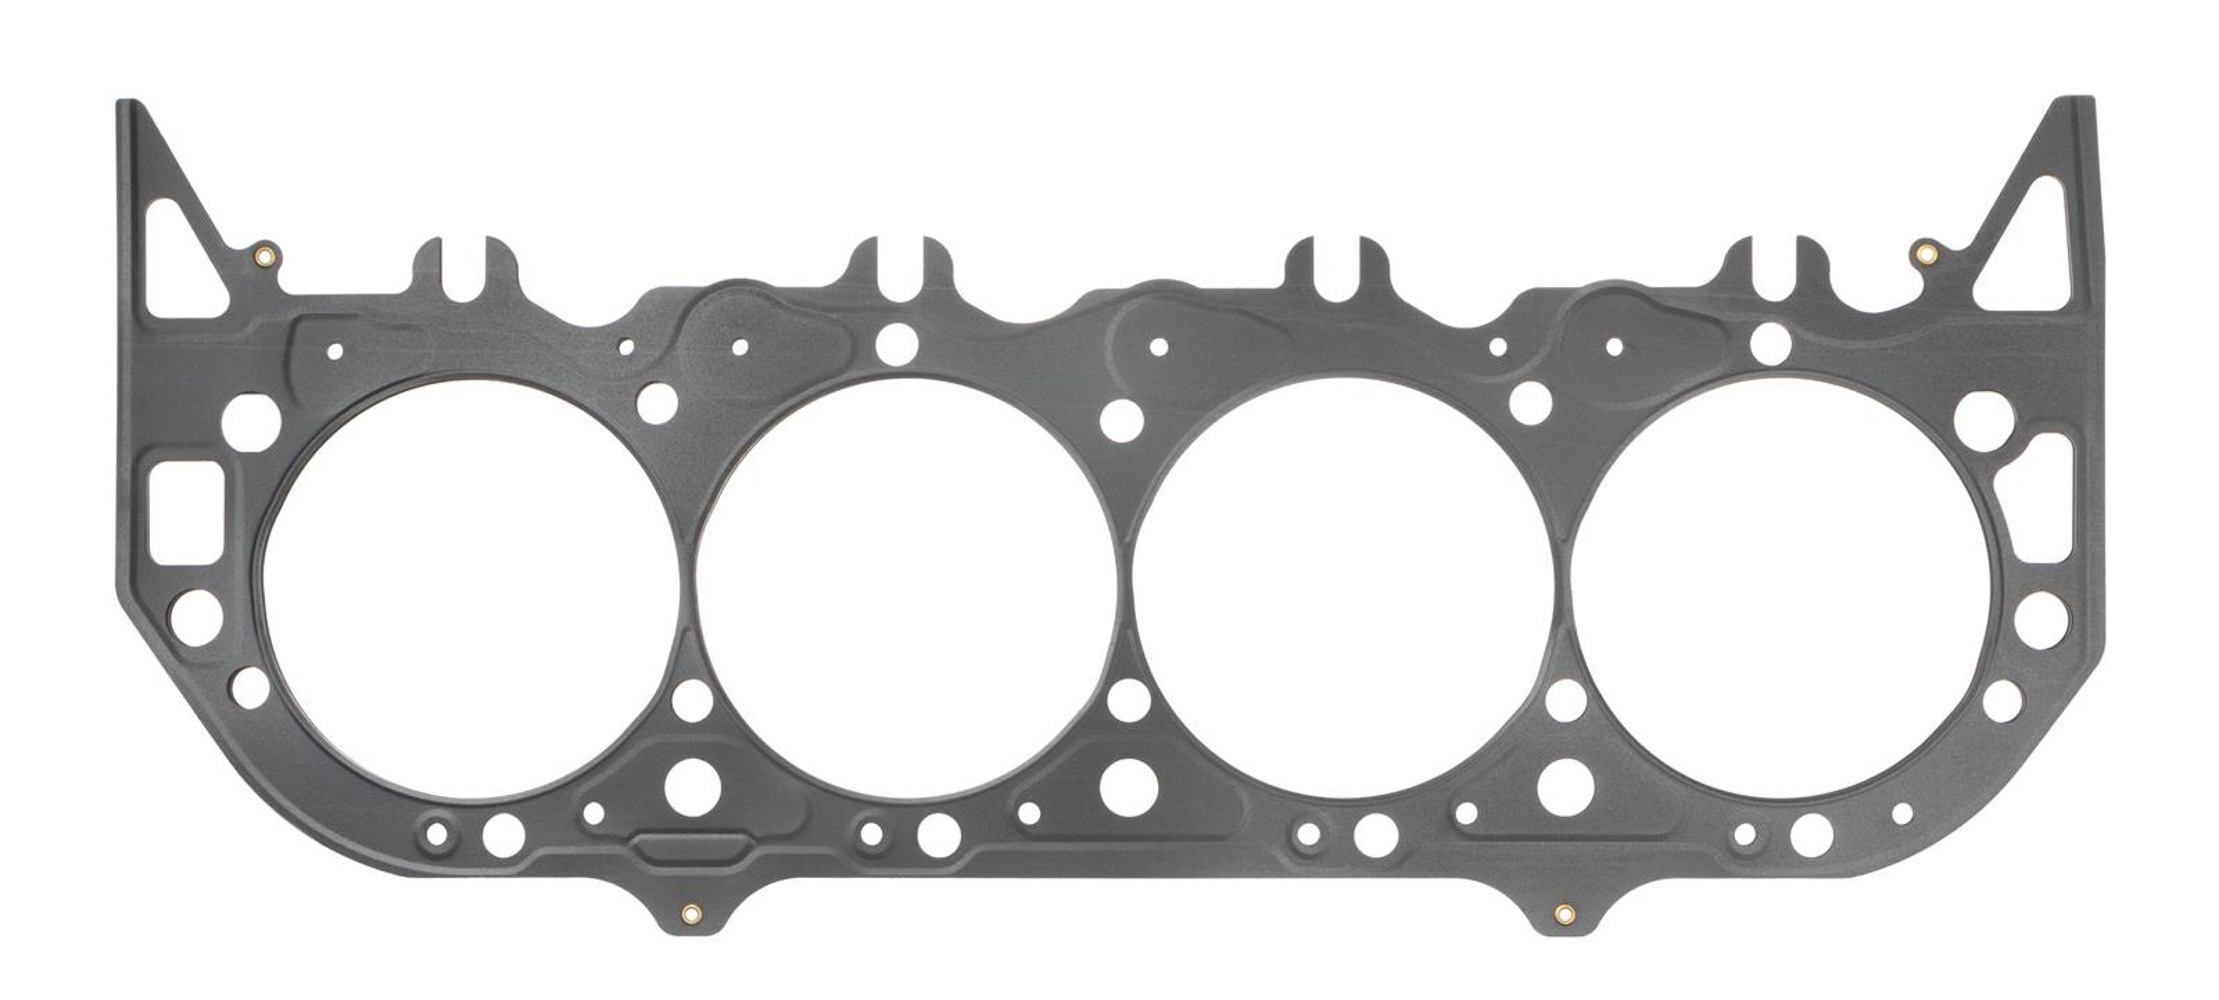 SCE Gaskets M136339 - Cylinder Head Gasket, MLS Spartan, 4.630 in Bore, 0.039 in Compression Thickness, Multi-Layer Steel, Big Block Chevy, Each